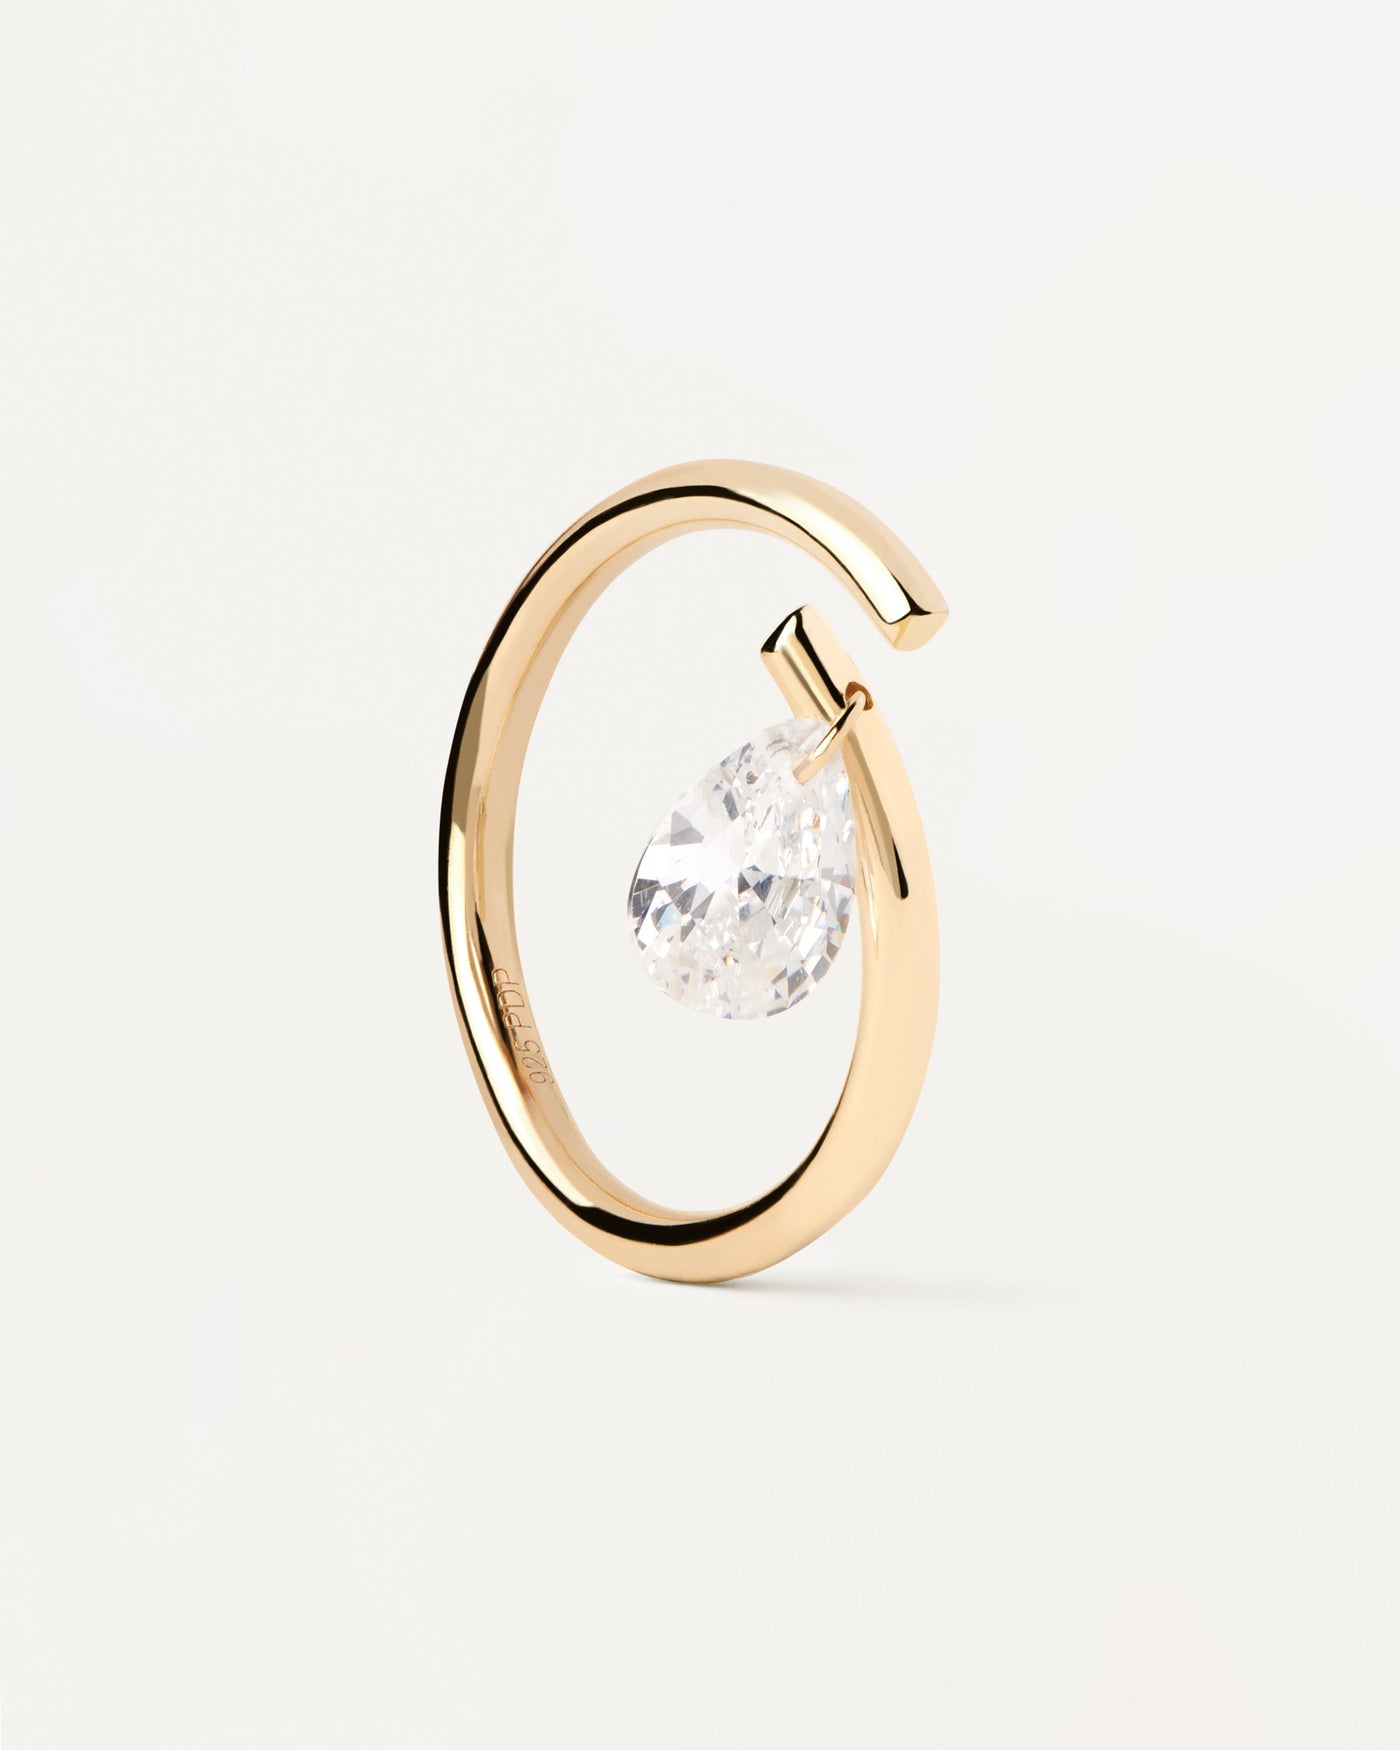 2023 Selection | Aqua Solitary Ring. Gold-plated open ring with white zirconia round pendant. Get the latest arrival from PDPAOLA. Place your order safely and get this Best Seller. Free Shipping.